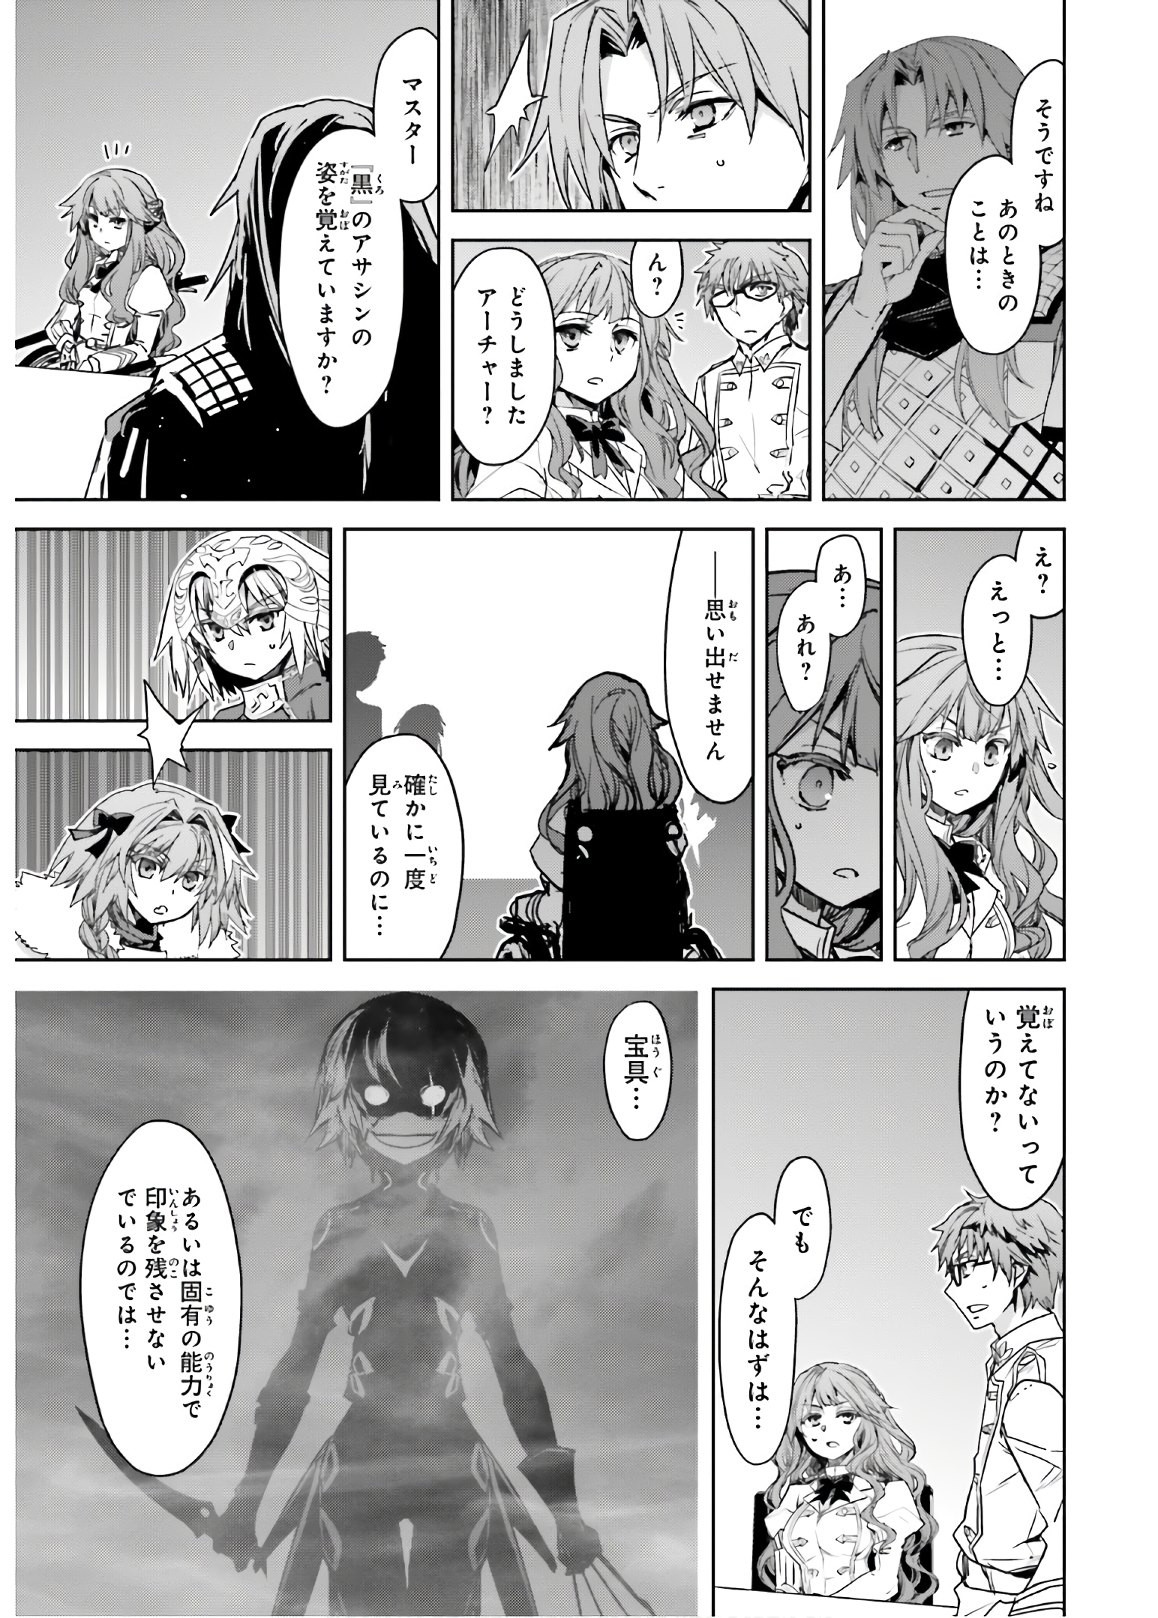 Fate-Apocrypha - Chapter 43 - Page 17